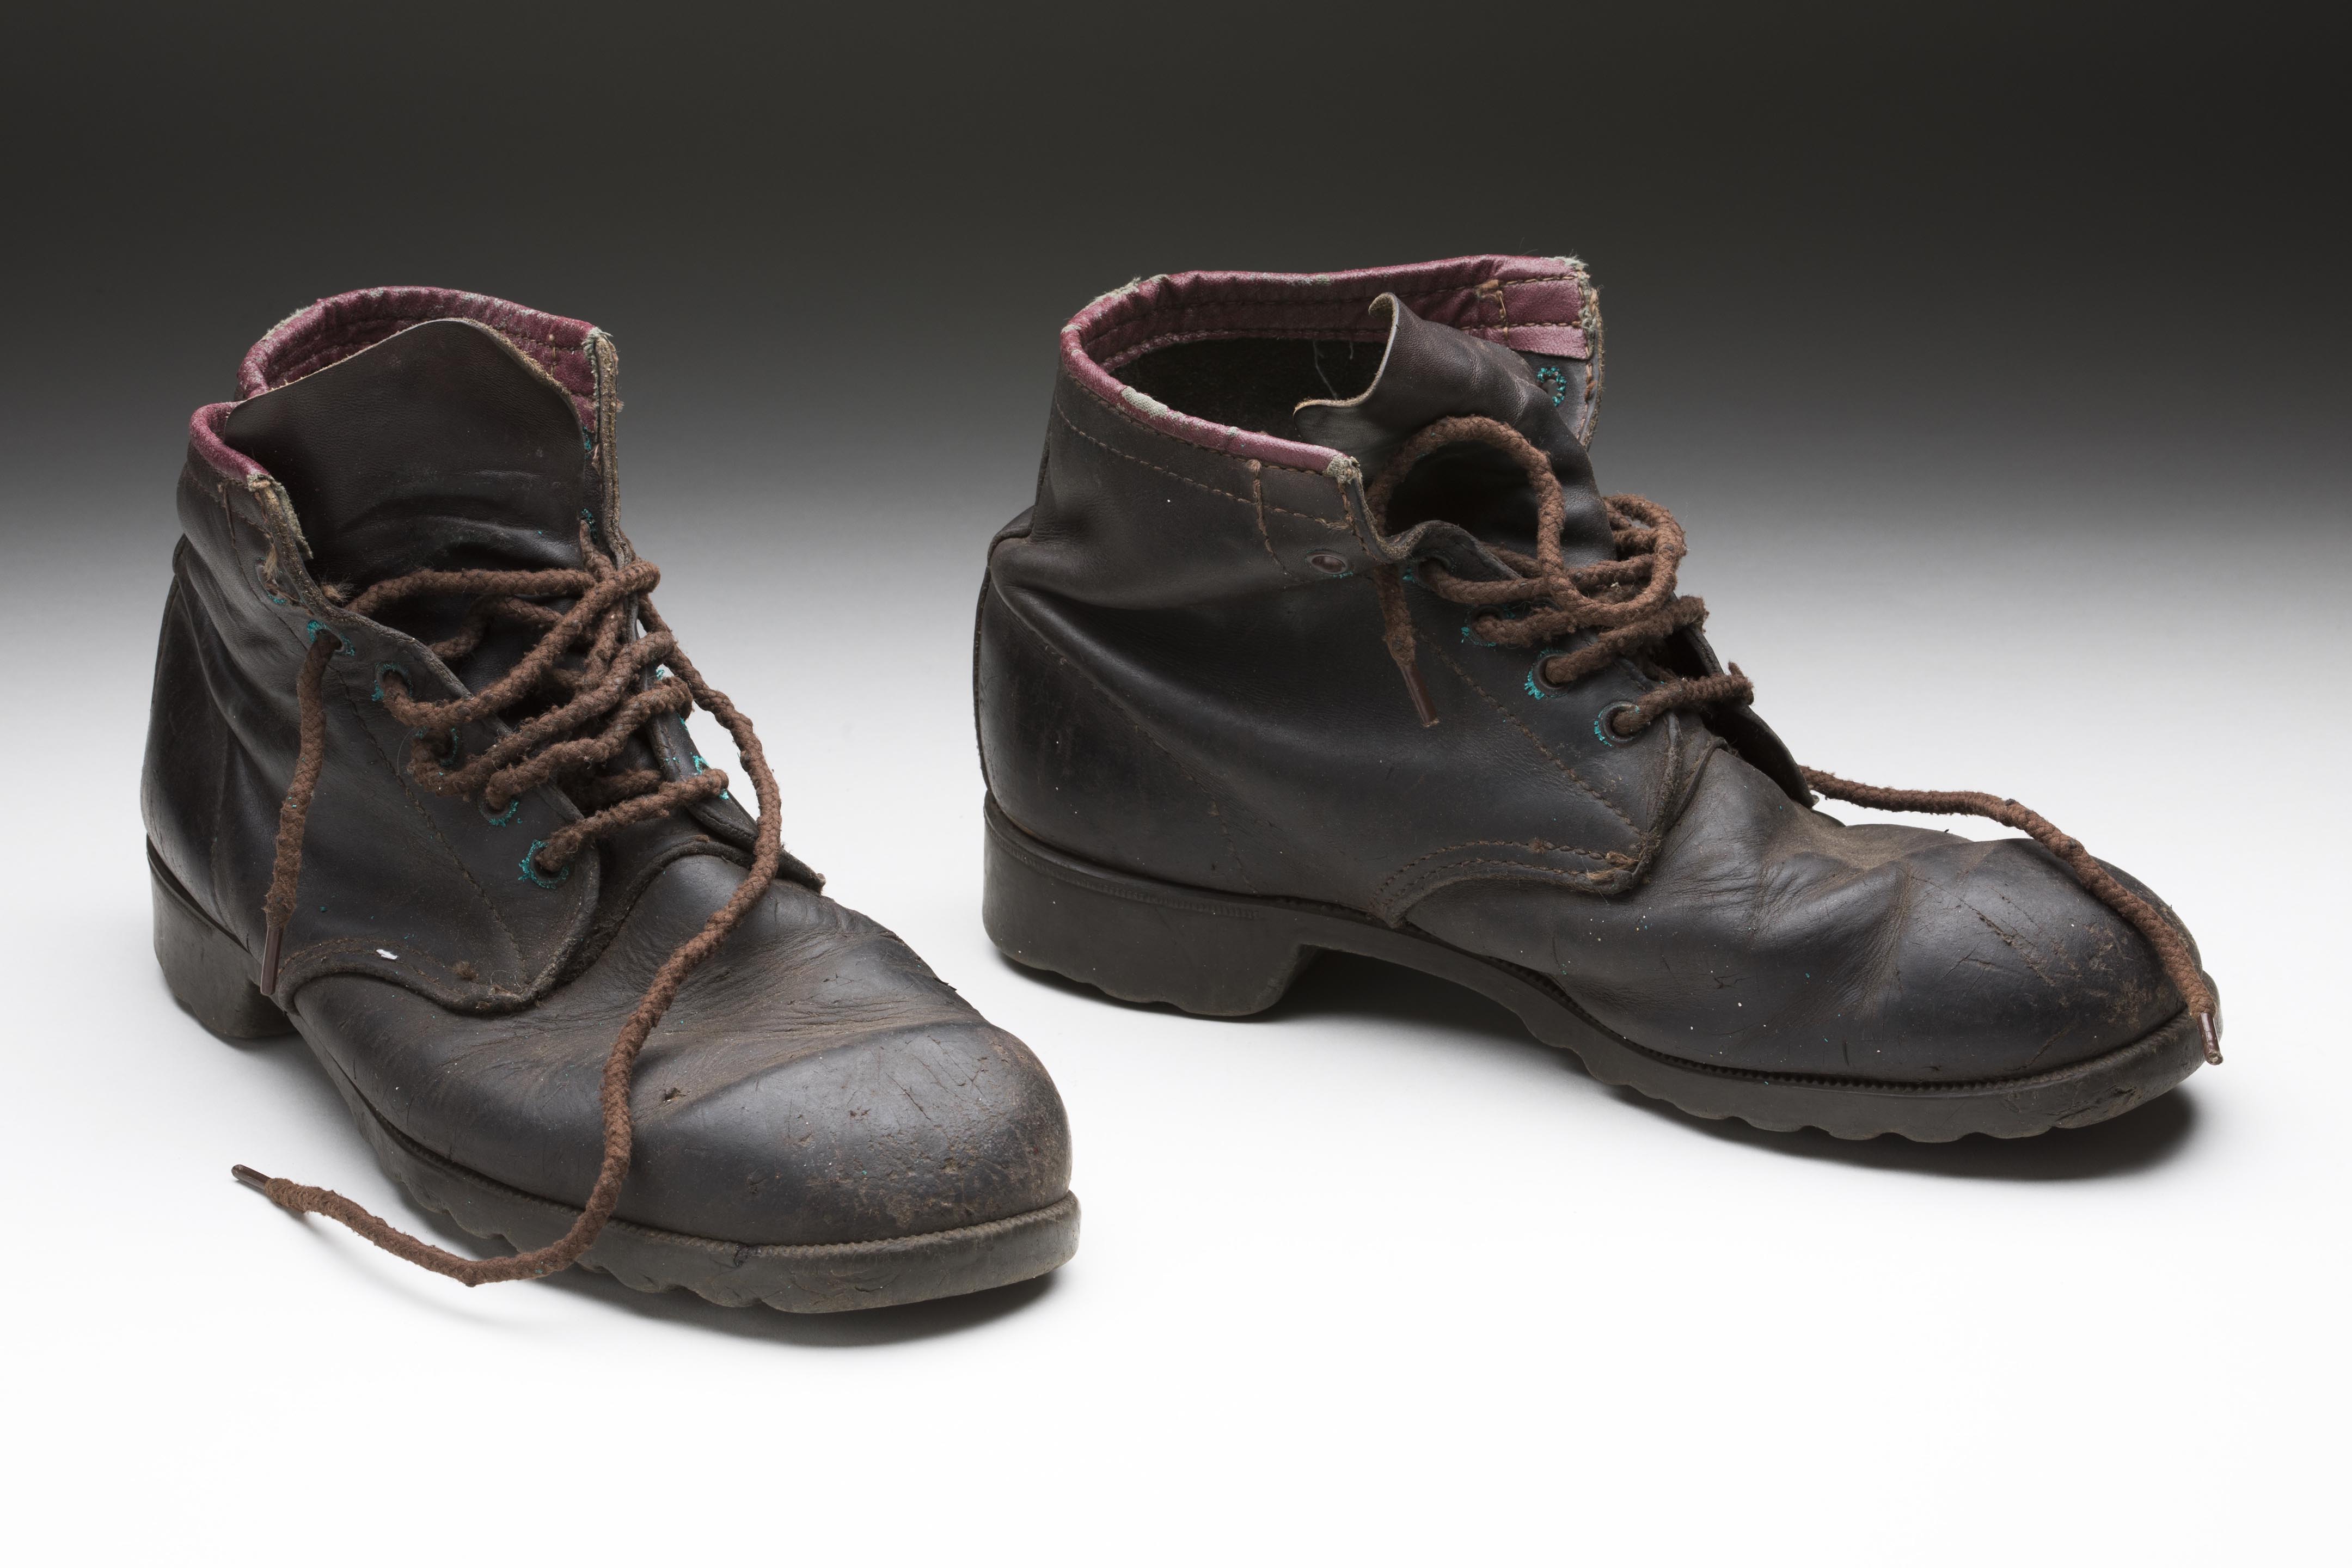 Dark brown leather hiking boots from the Milo Dunphy collection.